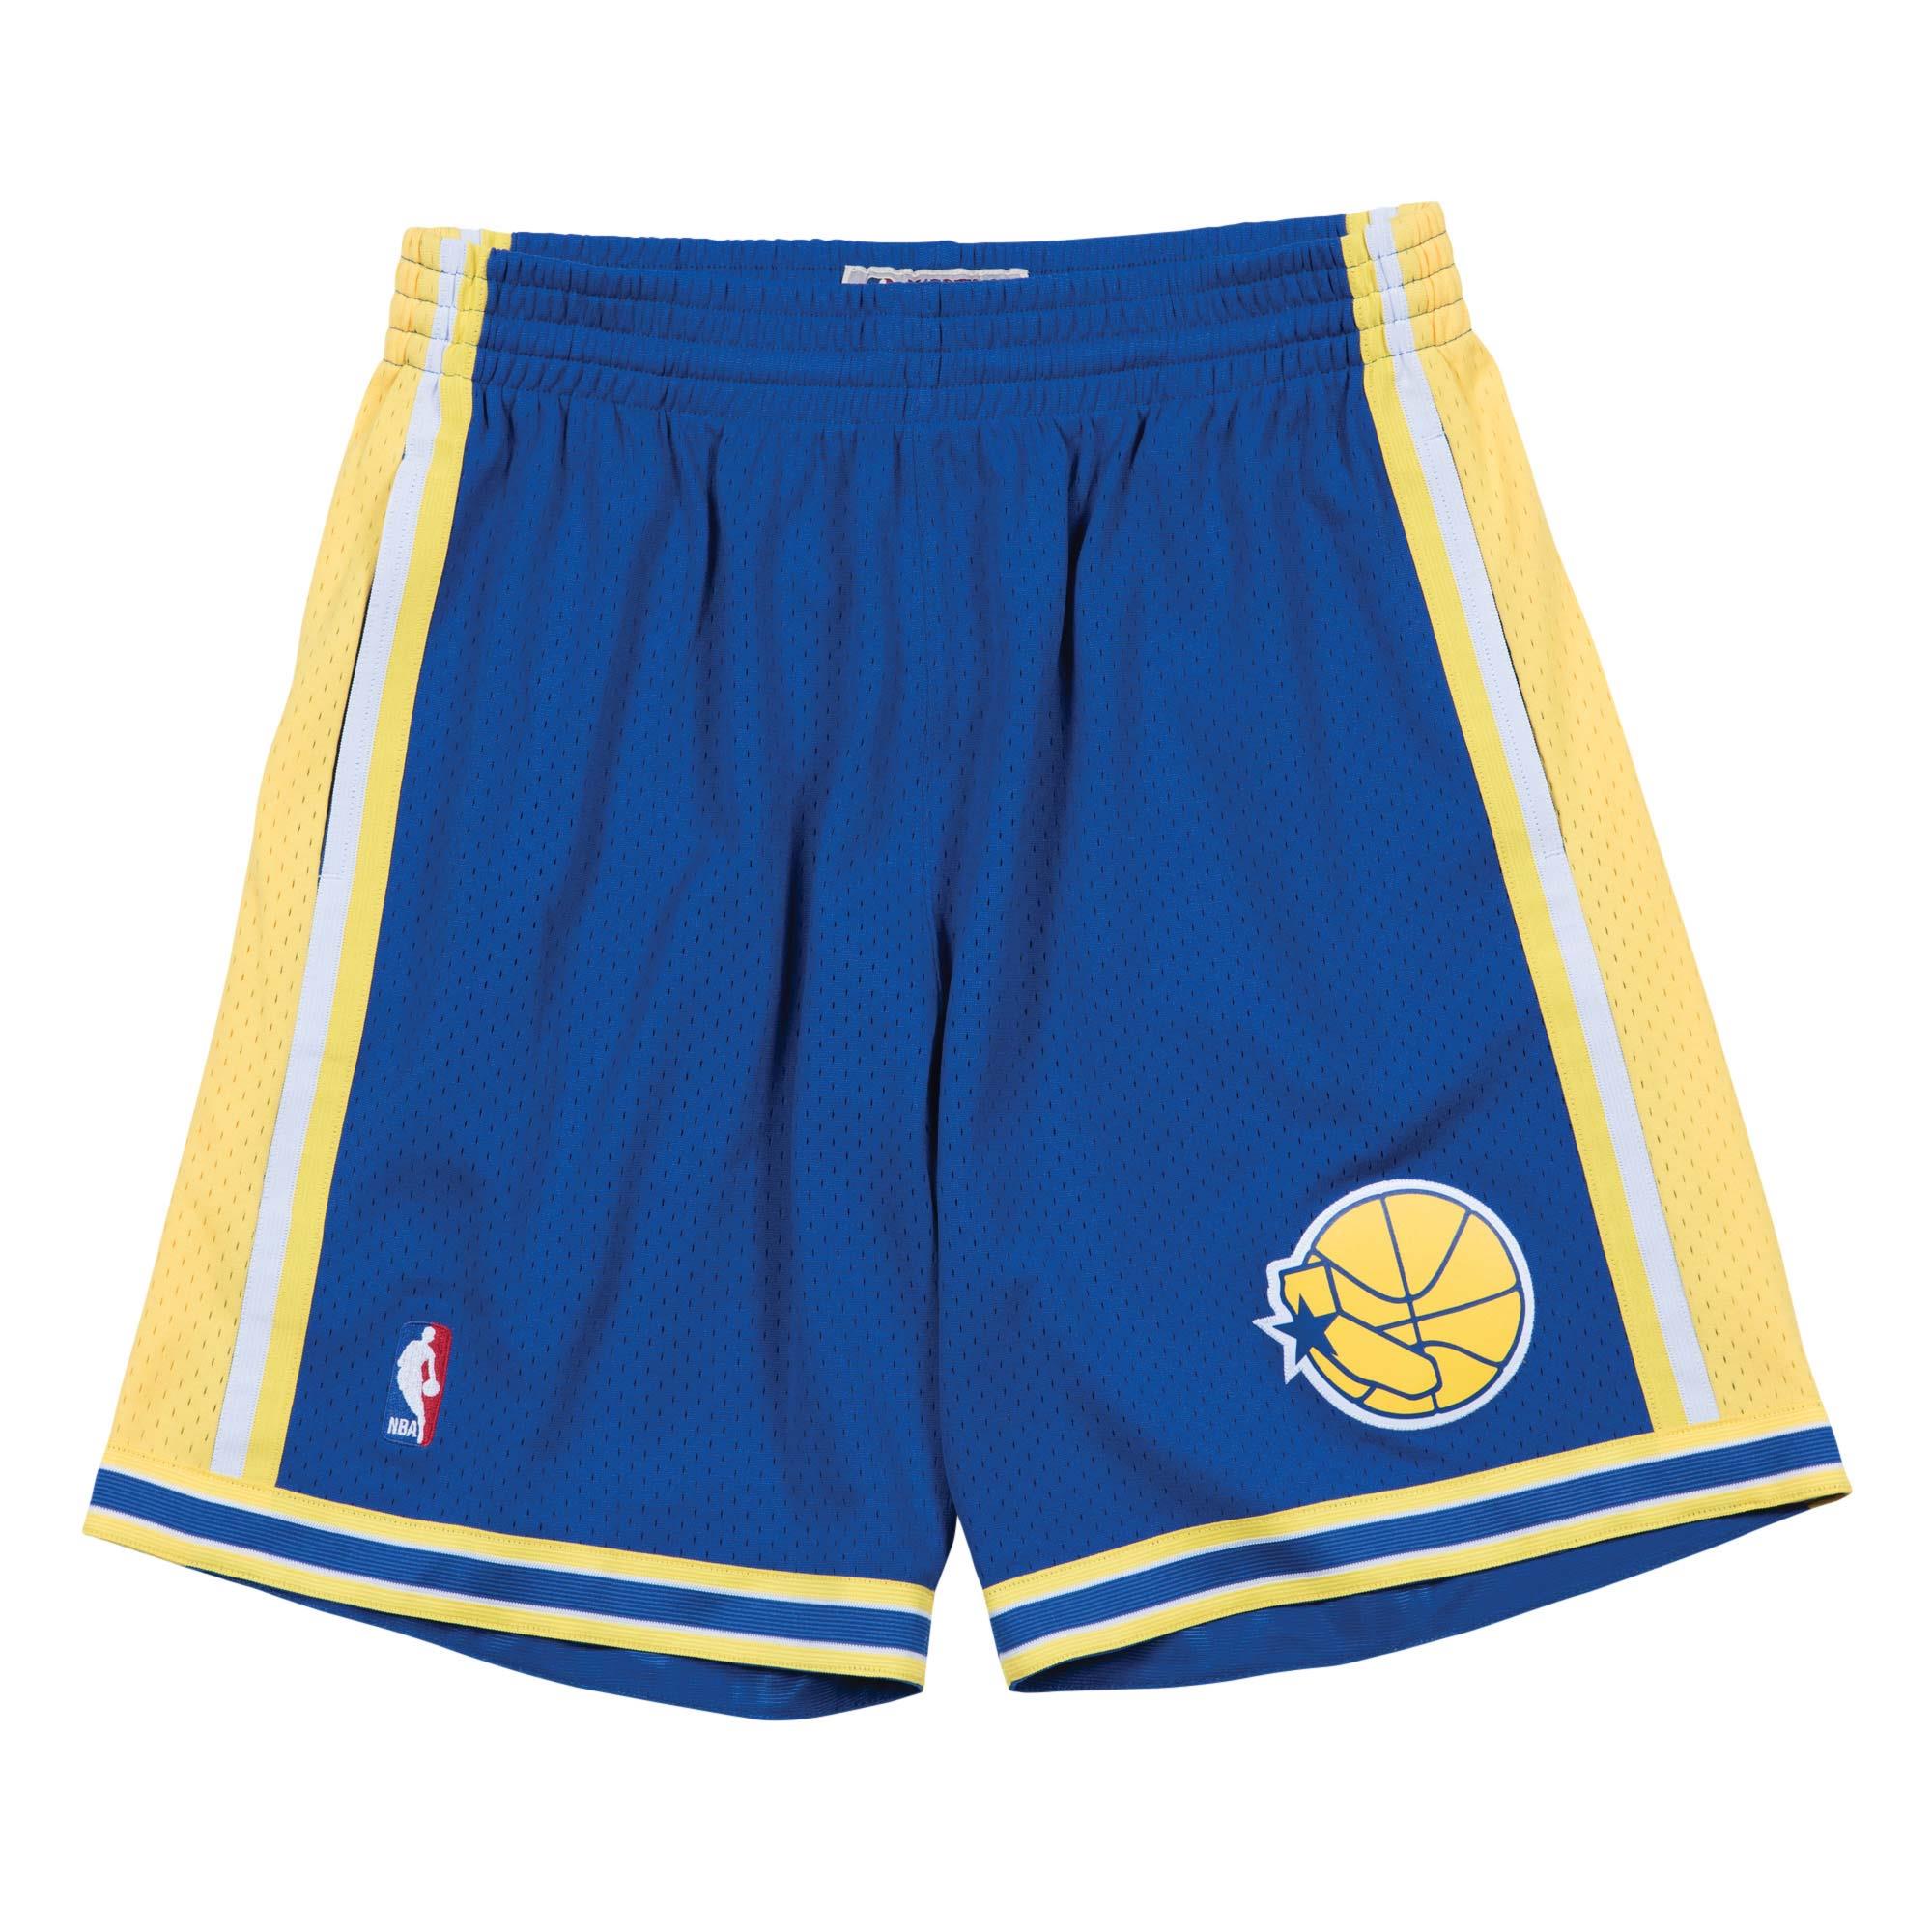 100% Authentic Bape x Mitchell Ness 09 10 Warriors Shorts Mens curry Large